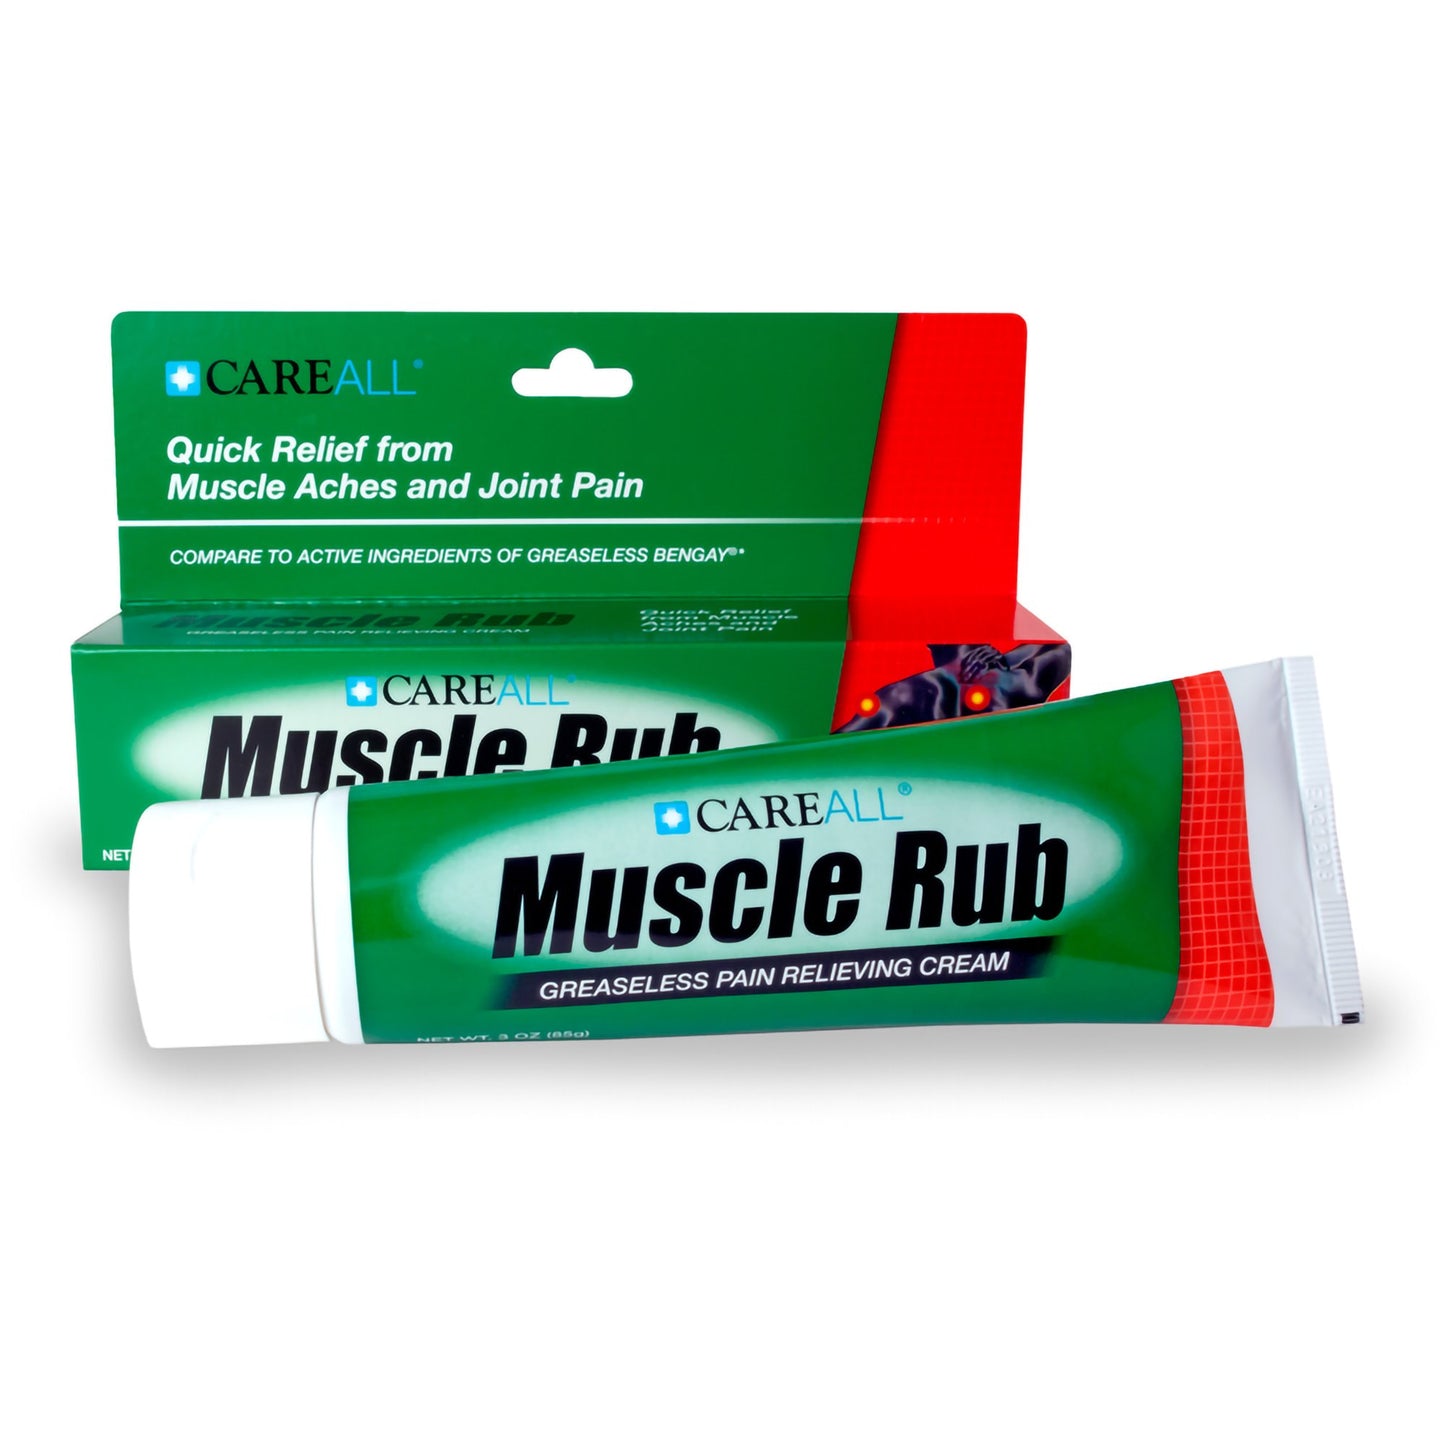 CareAll® Muscle Rub Topical Pain Relief Cream, Menthol, 3 fl oz